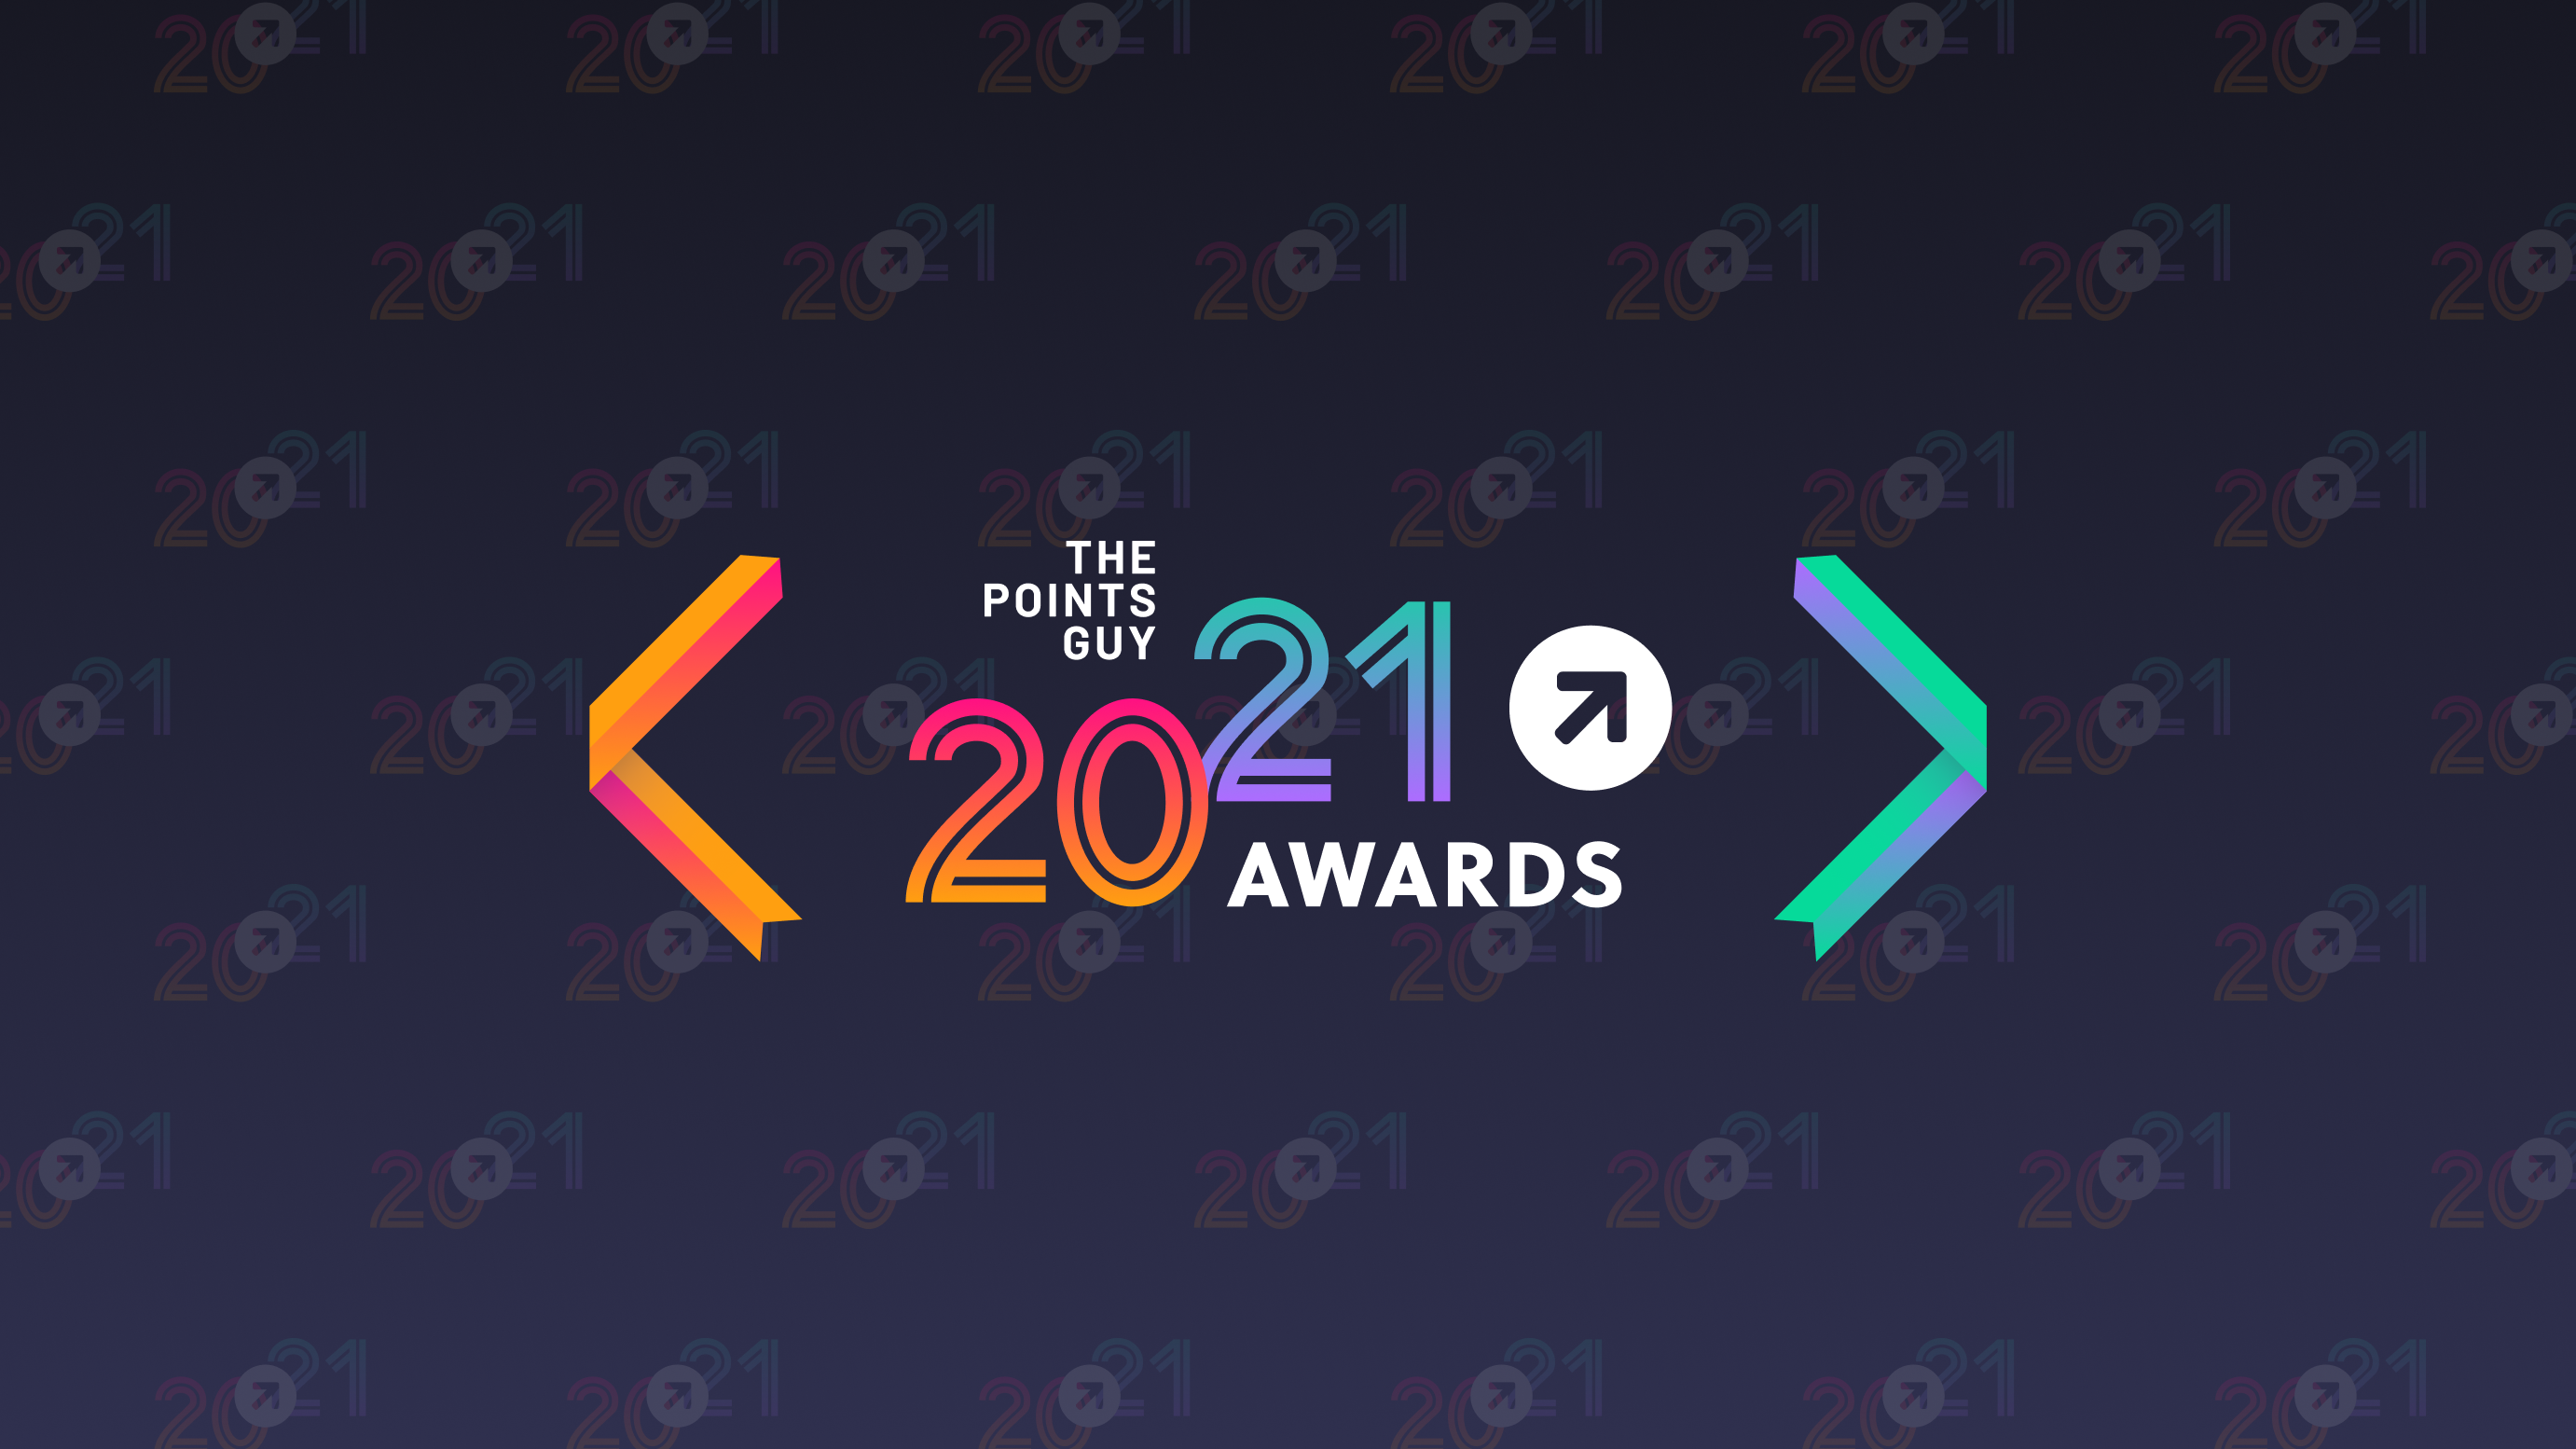 2021 TPG Awards: The best U.S. airports, the best airline loyalty program & more